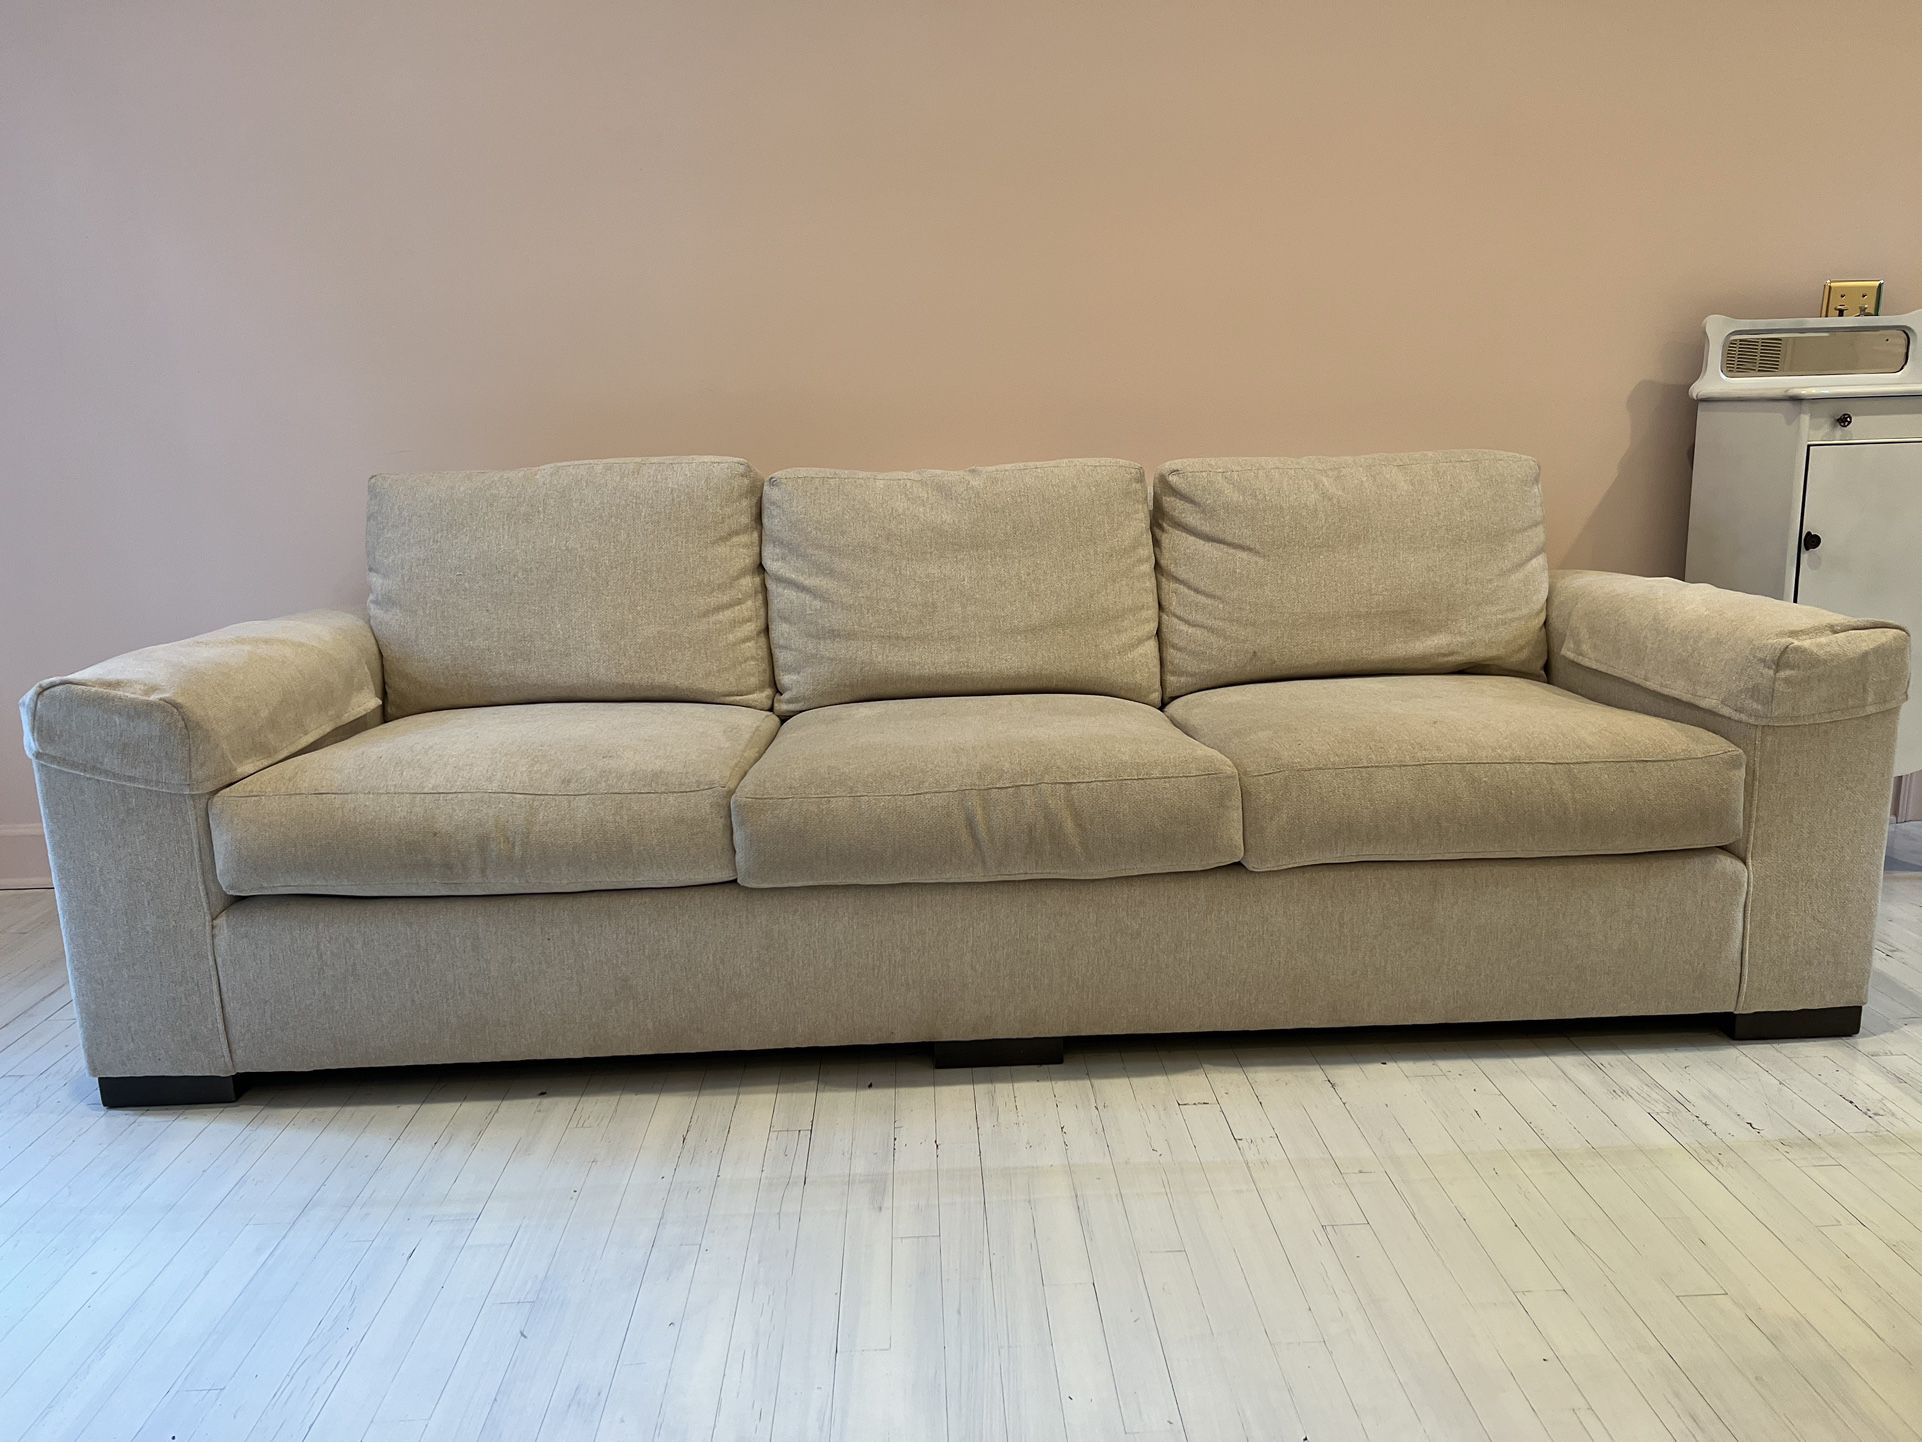 Head depot Couch